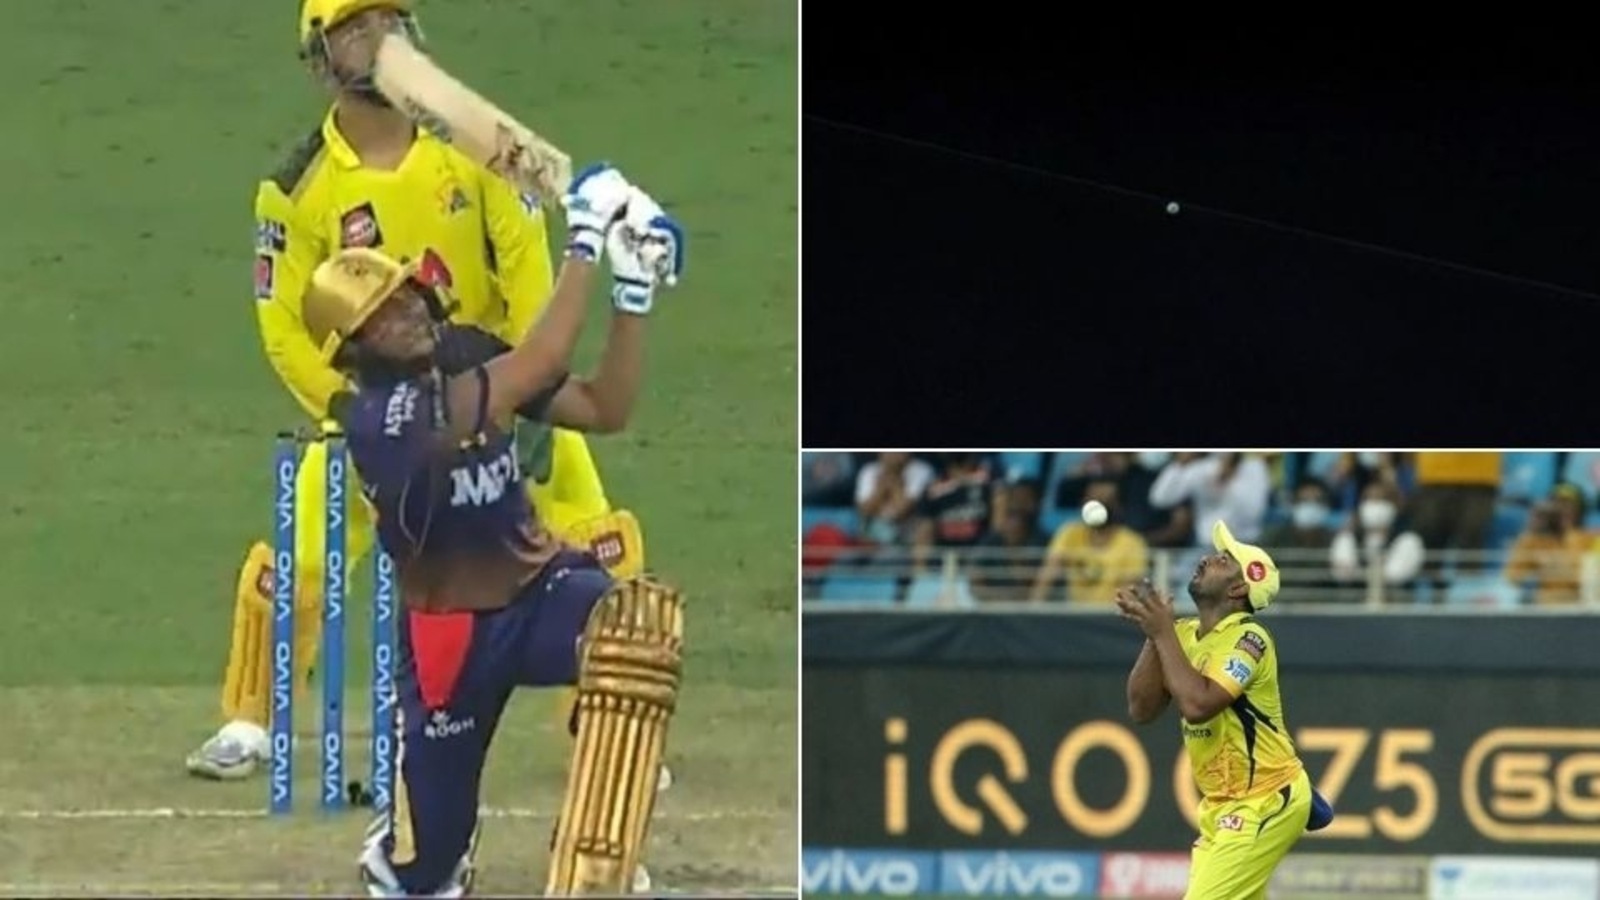 IPL 2021 final Spider-cam comes to Shubman Gills rescue, denies Ravindra Jadeja from a wicket - Watch video Cricket